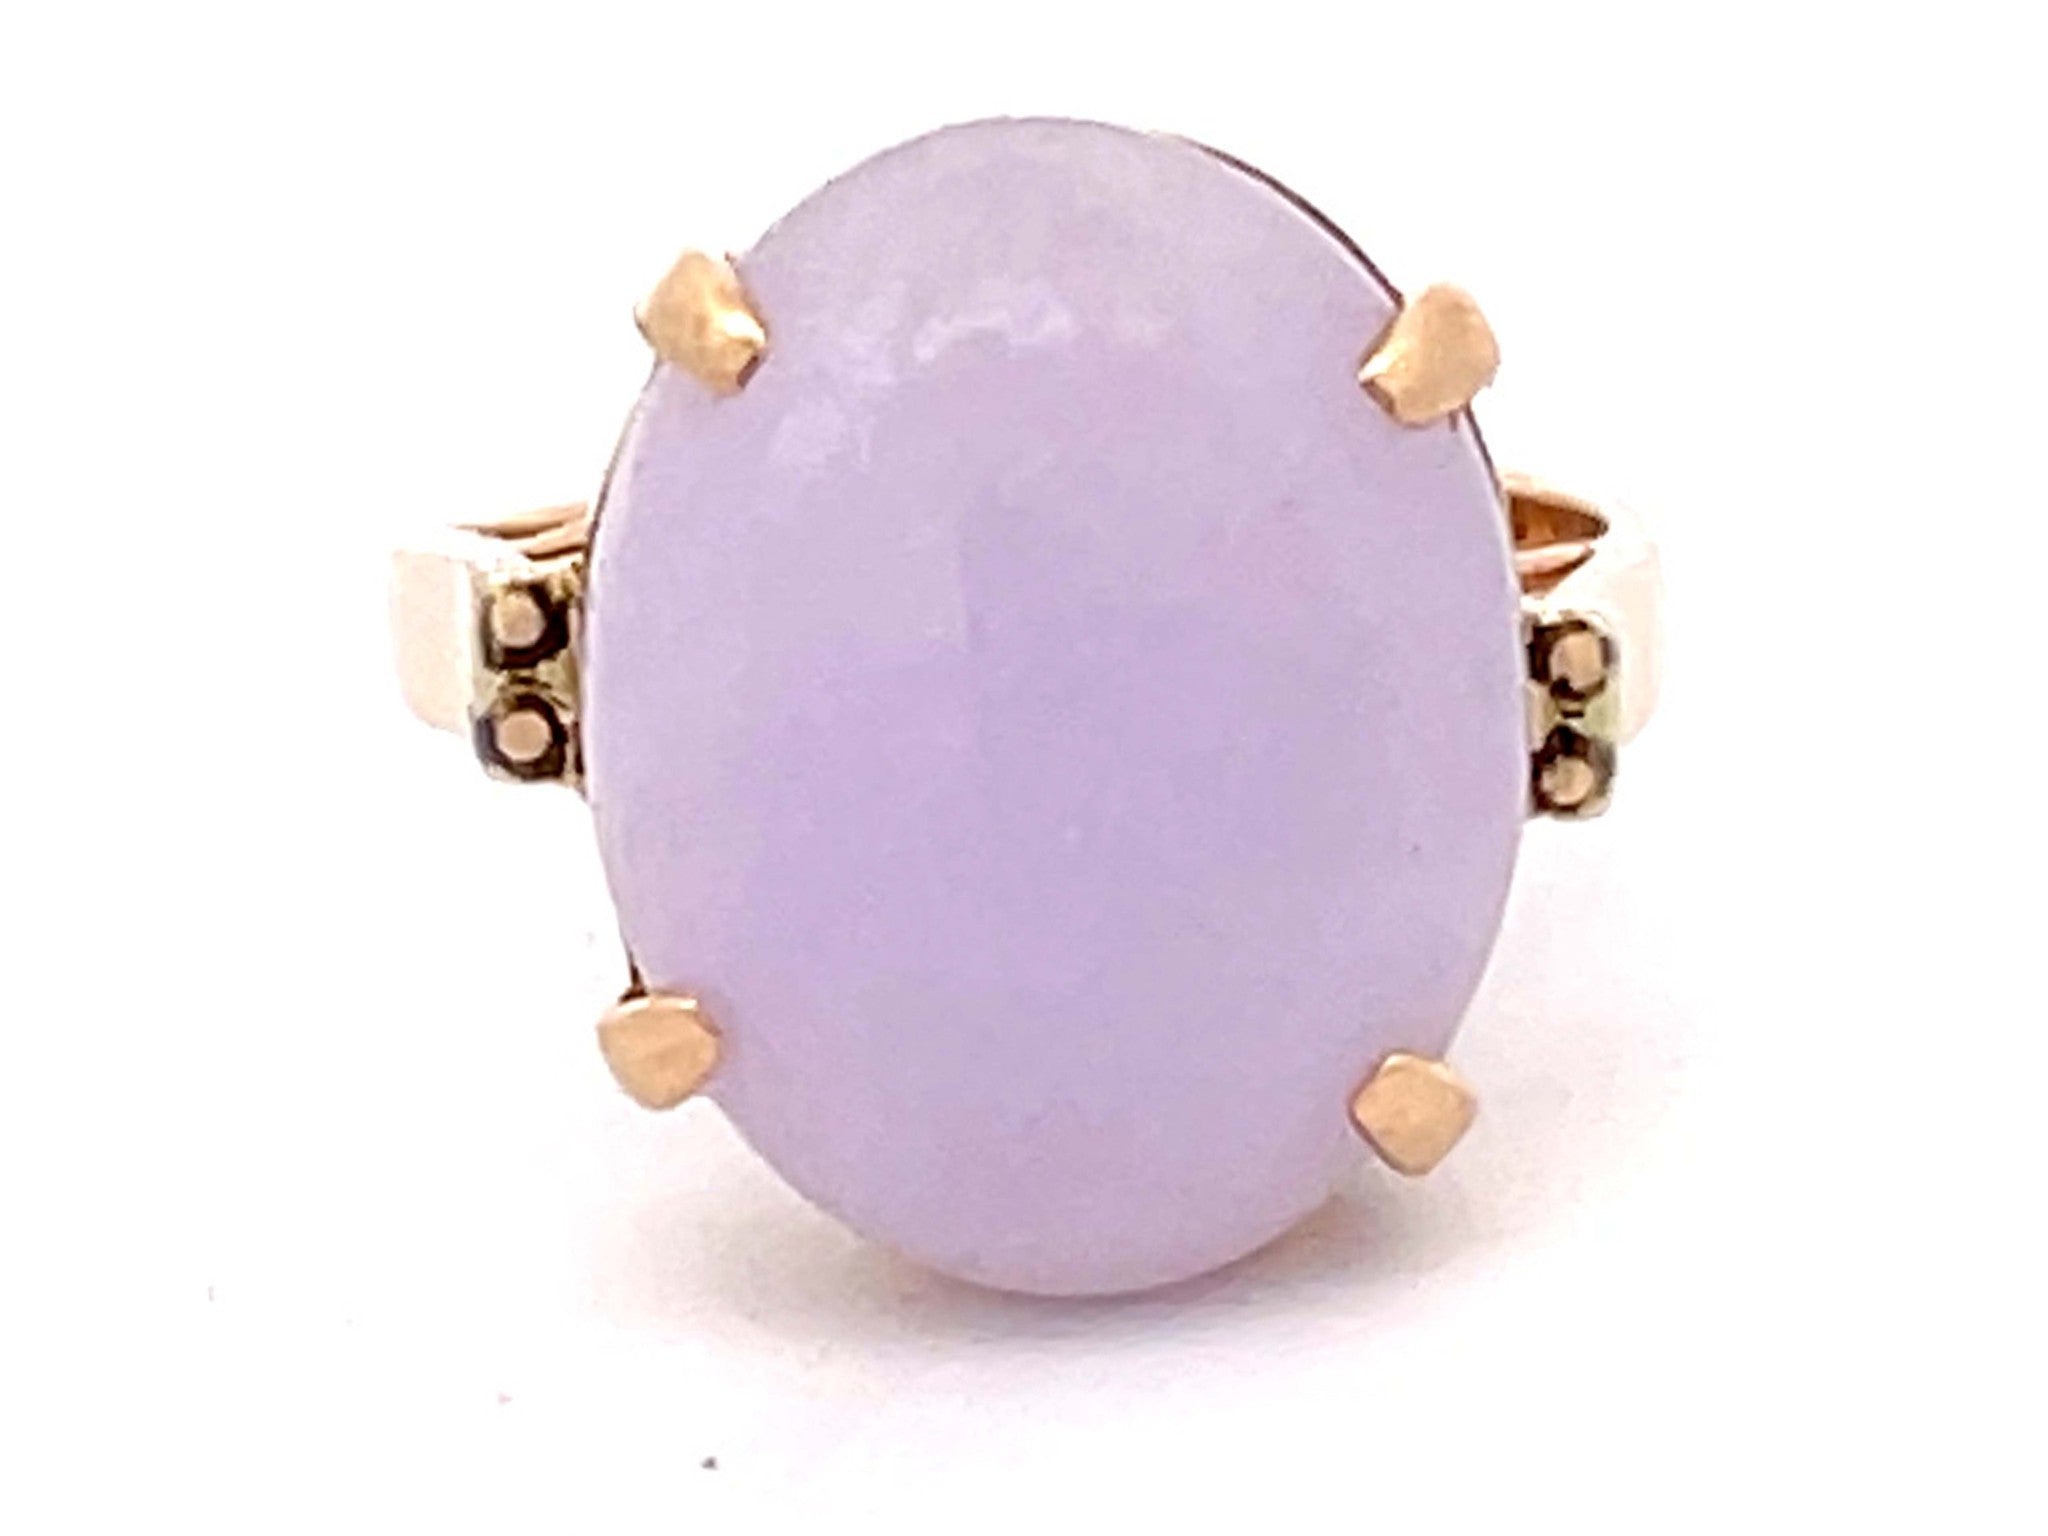 Lavender Oval Jade Cabochon Ring in 14k Yellow Gold